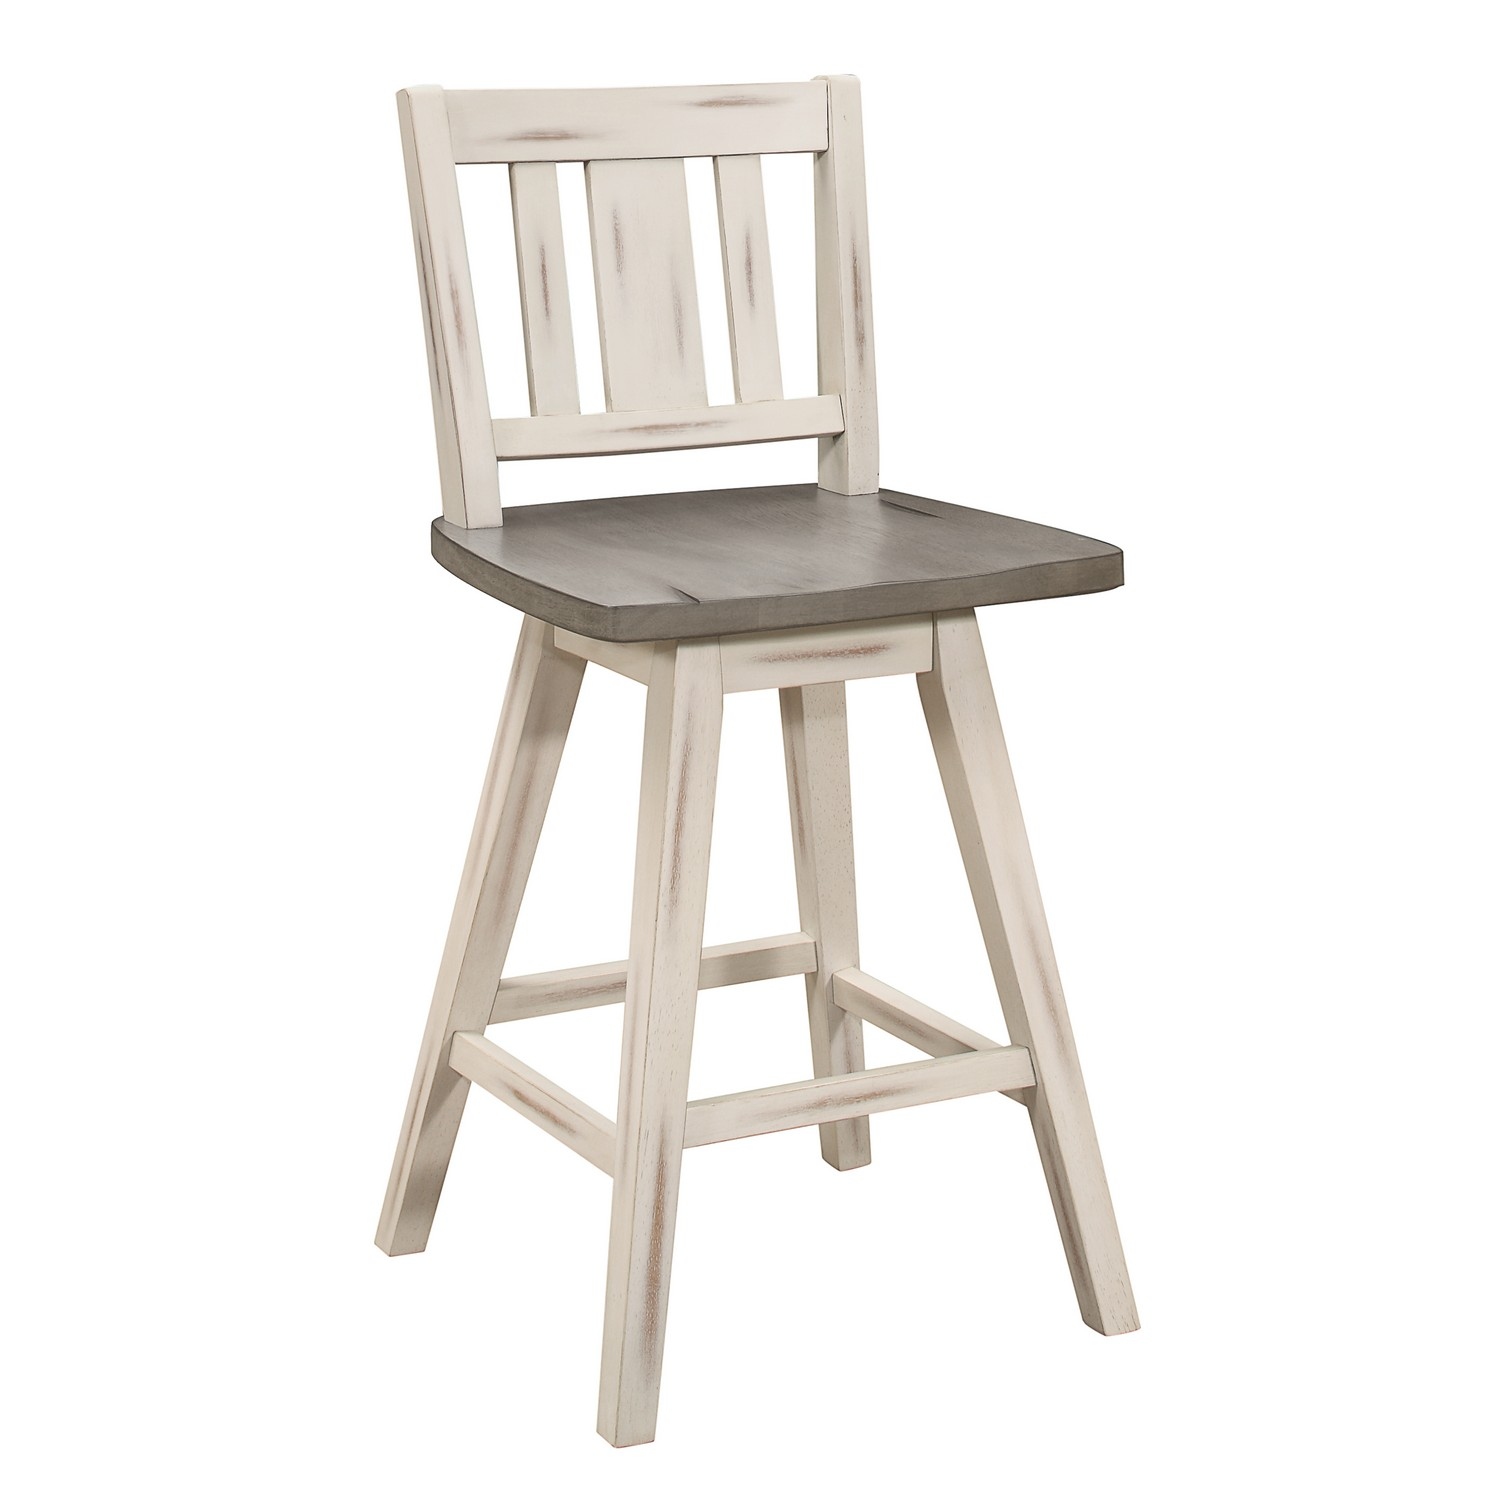 Homelegance Amsonia Swivel Counter Height Chair - Distressed Gray/White